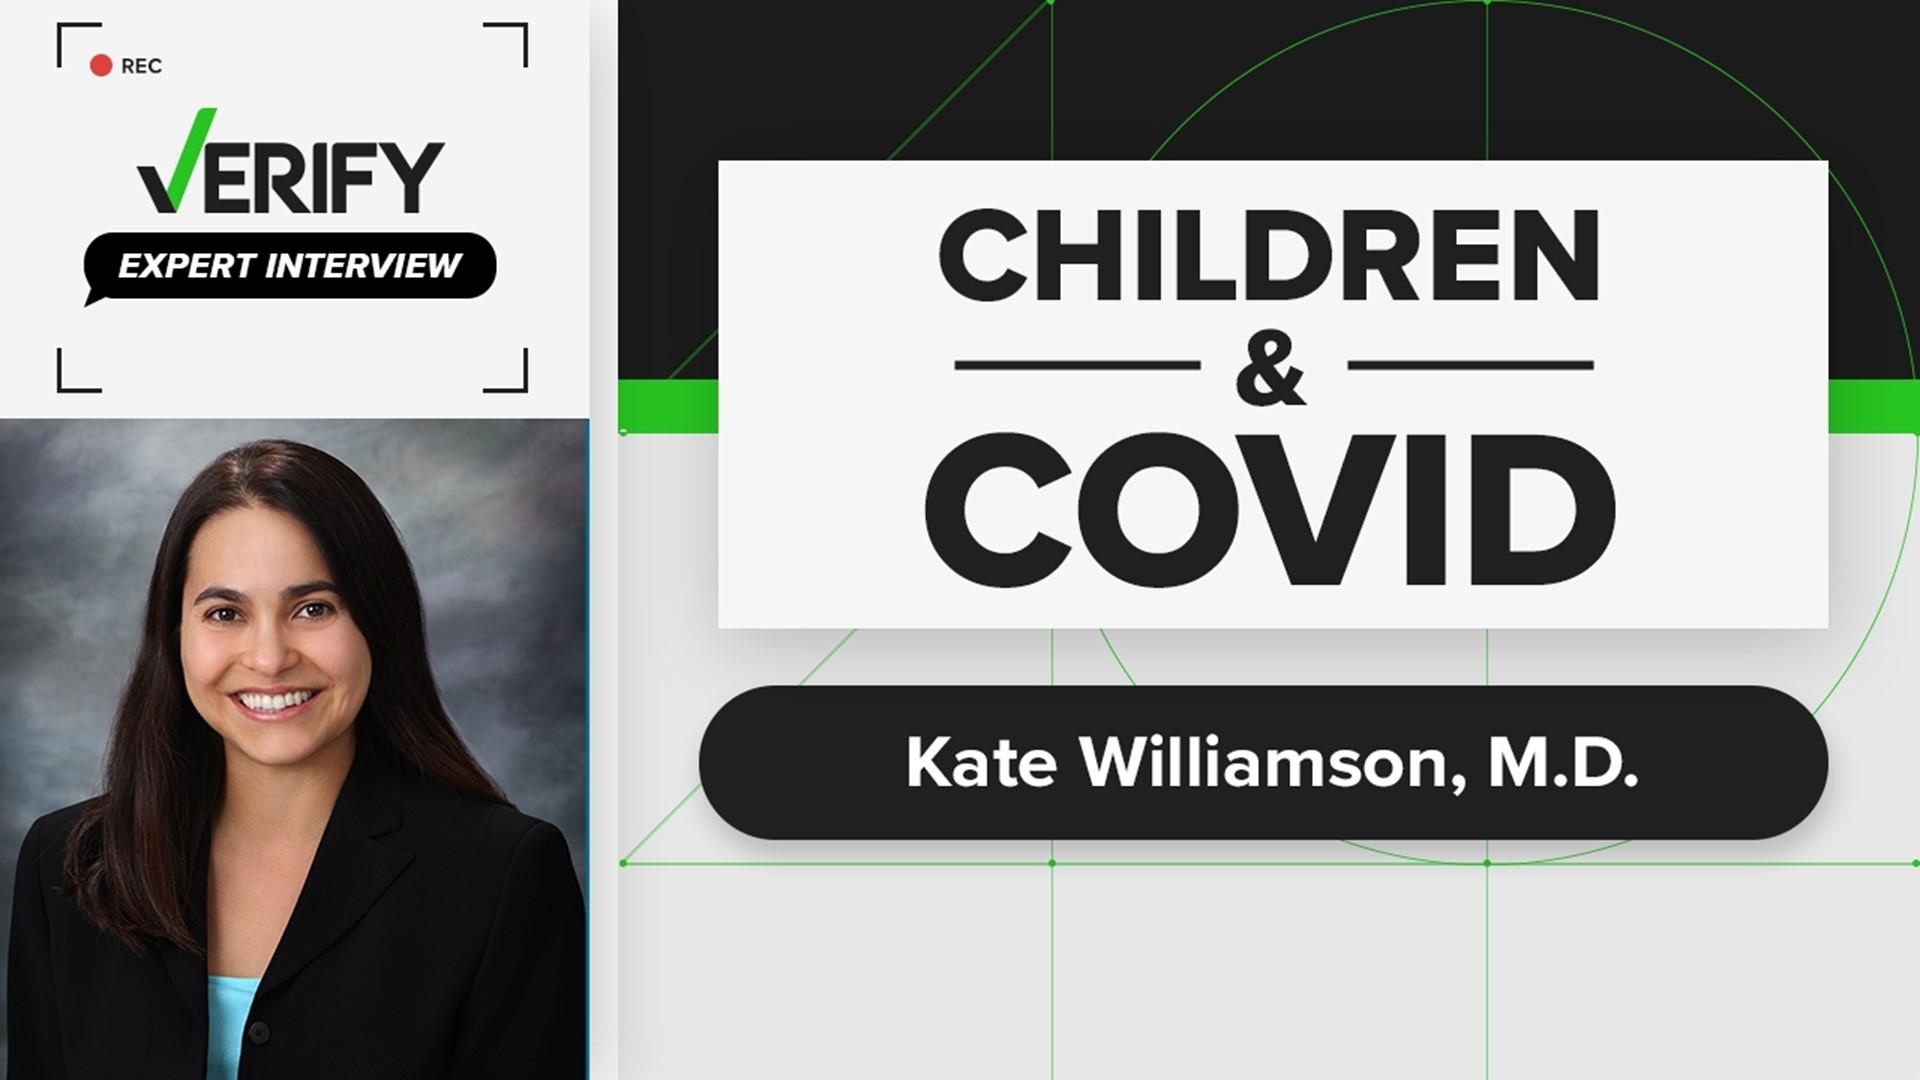 In this interview with Dr. Kate Williamson, we discuss how children can be affected by COVID long-haul syndrome and other symptoms at varying degrees of vaccination.